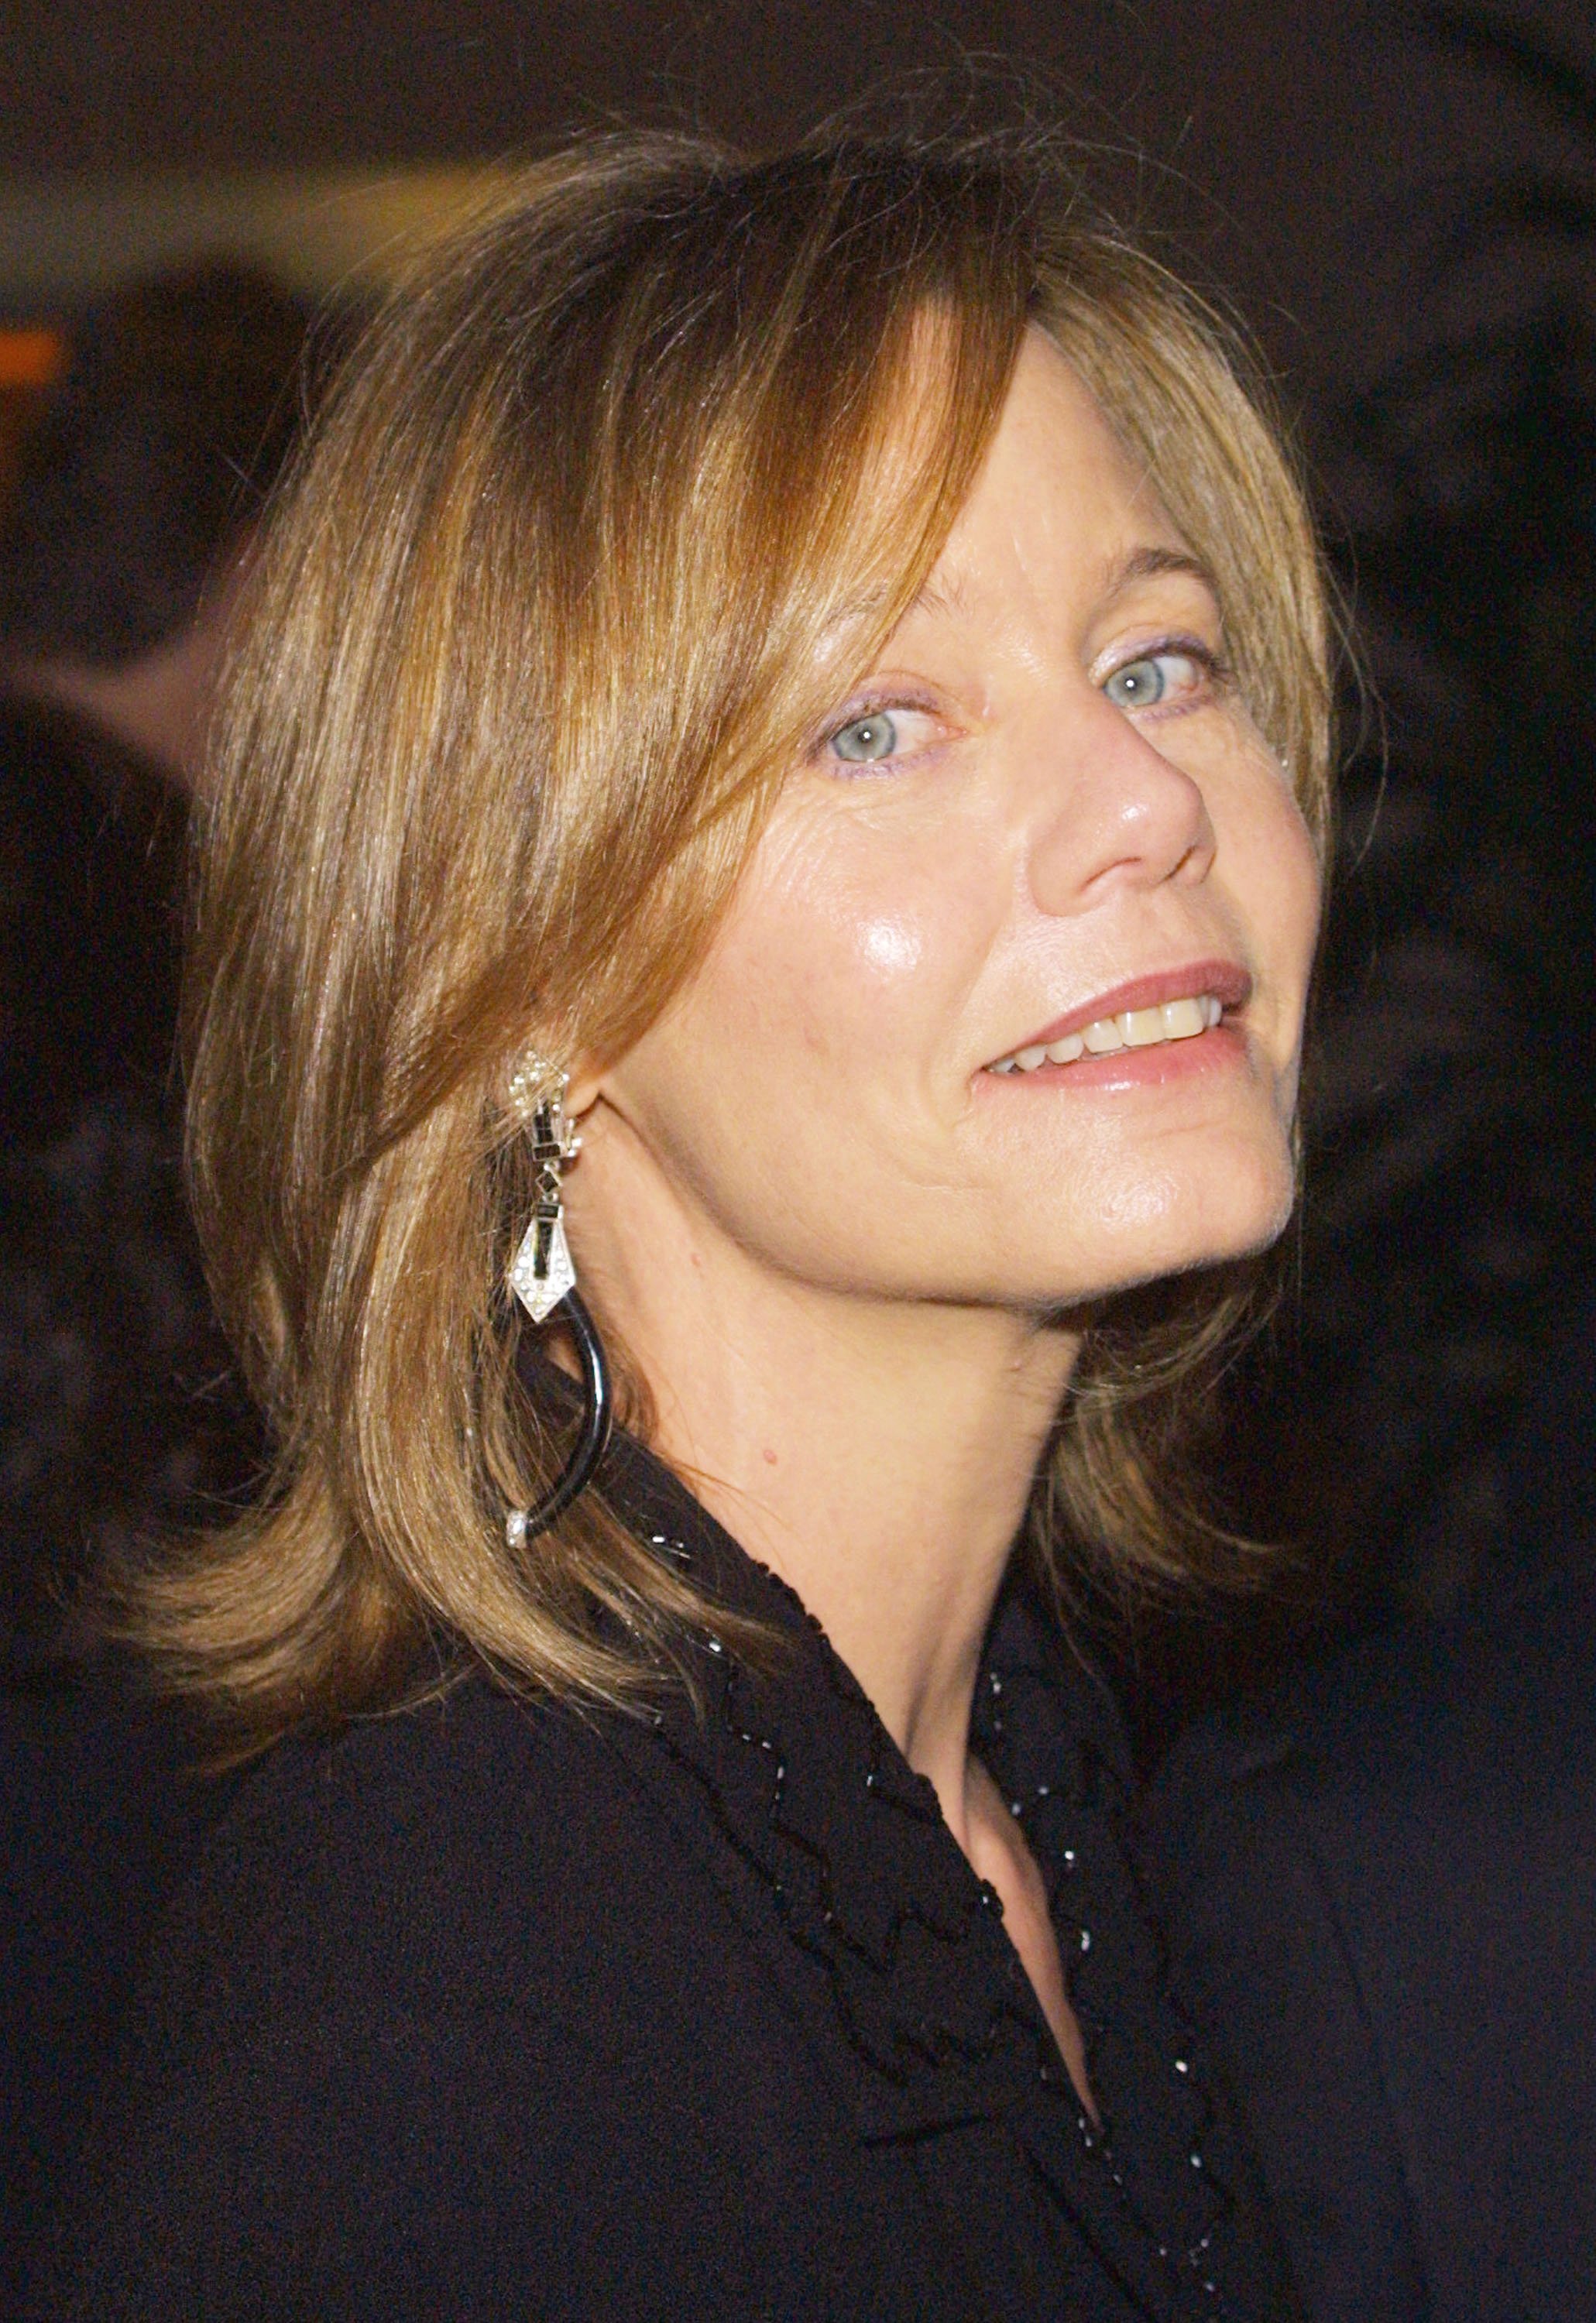 Susan Dey attends the 53rd Annual ACE Eddie Awards at the Beverly Hilton Hotel on February 23, 2003 in Beverly Hills, California. | Photo: Getty Images